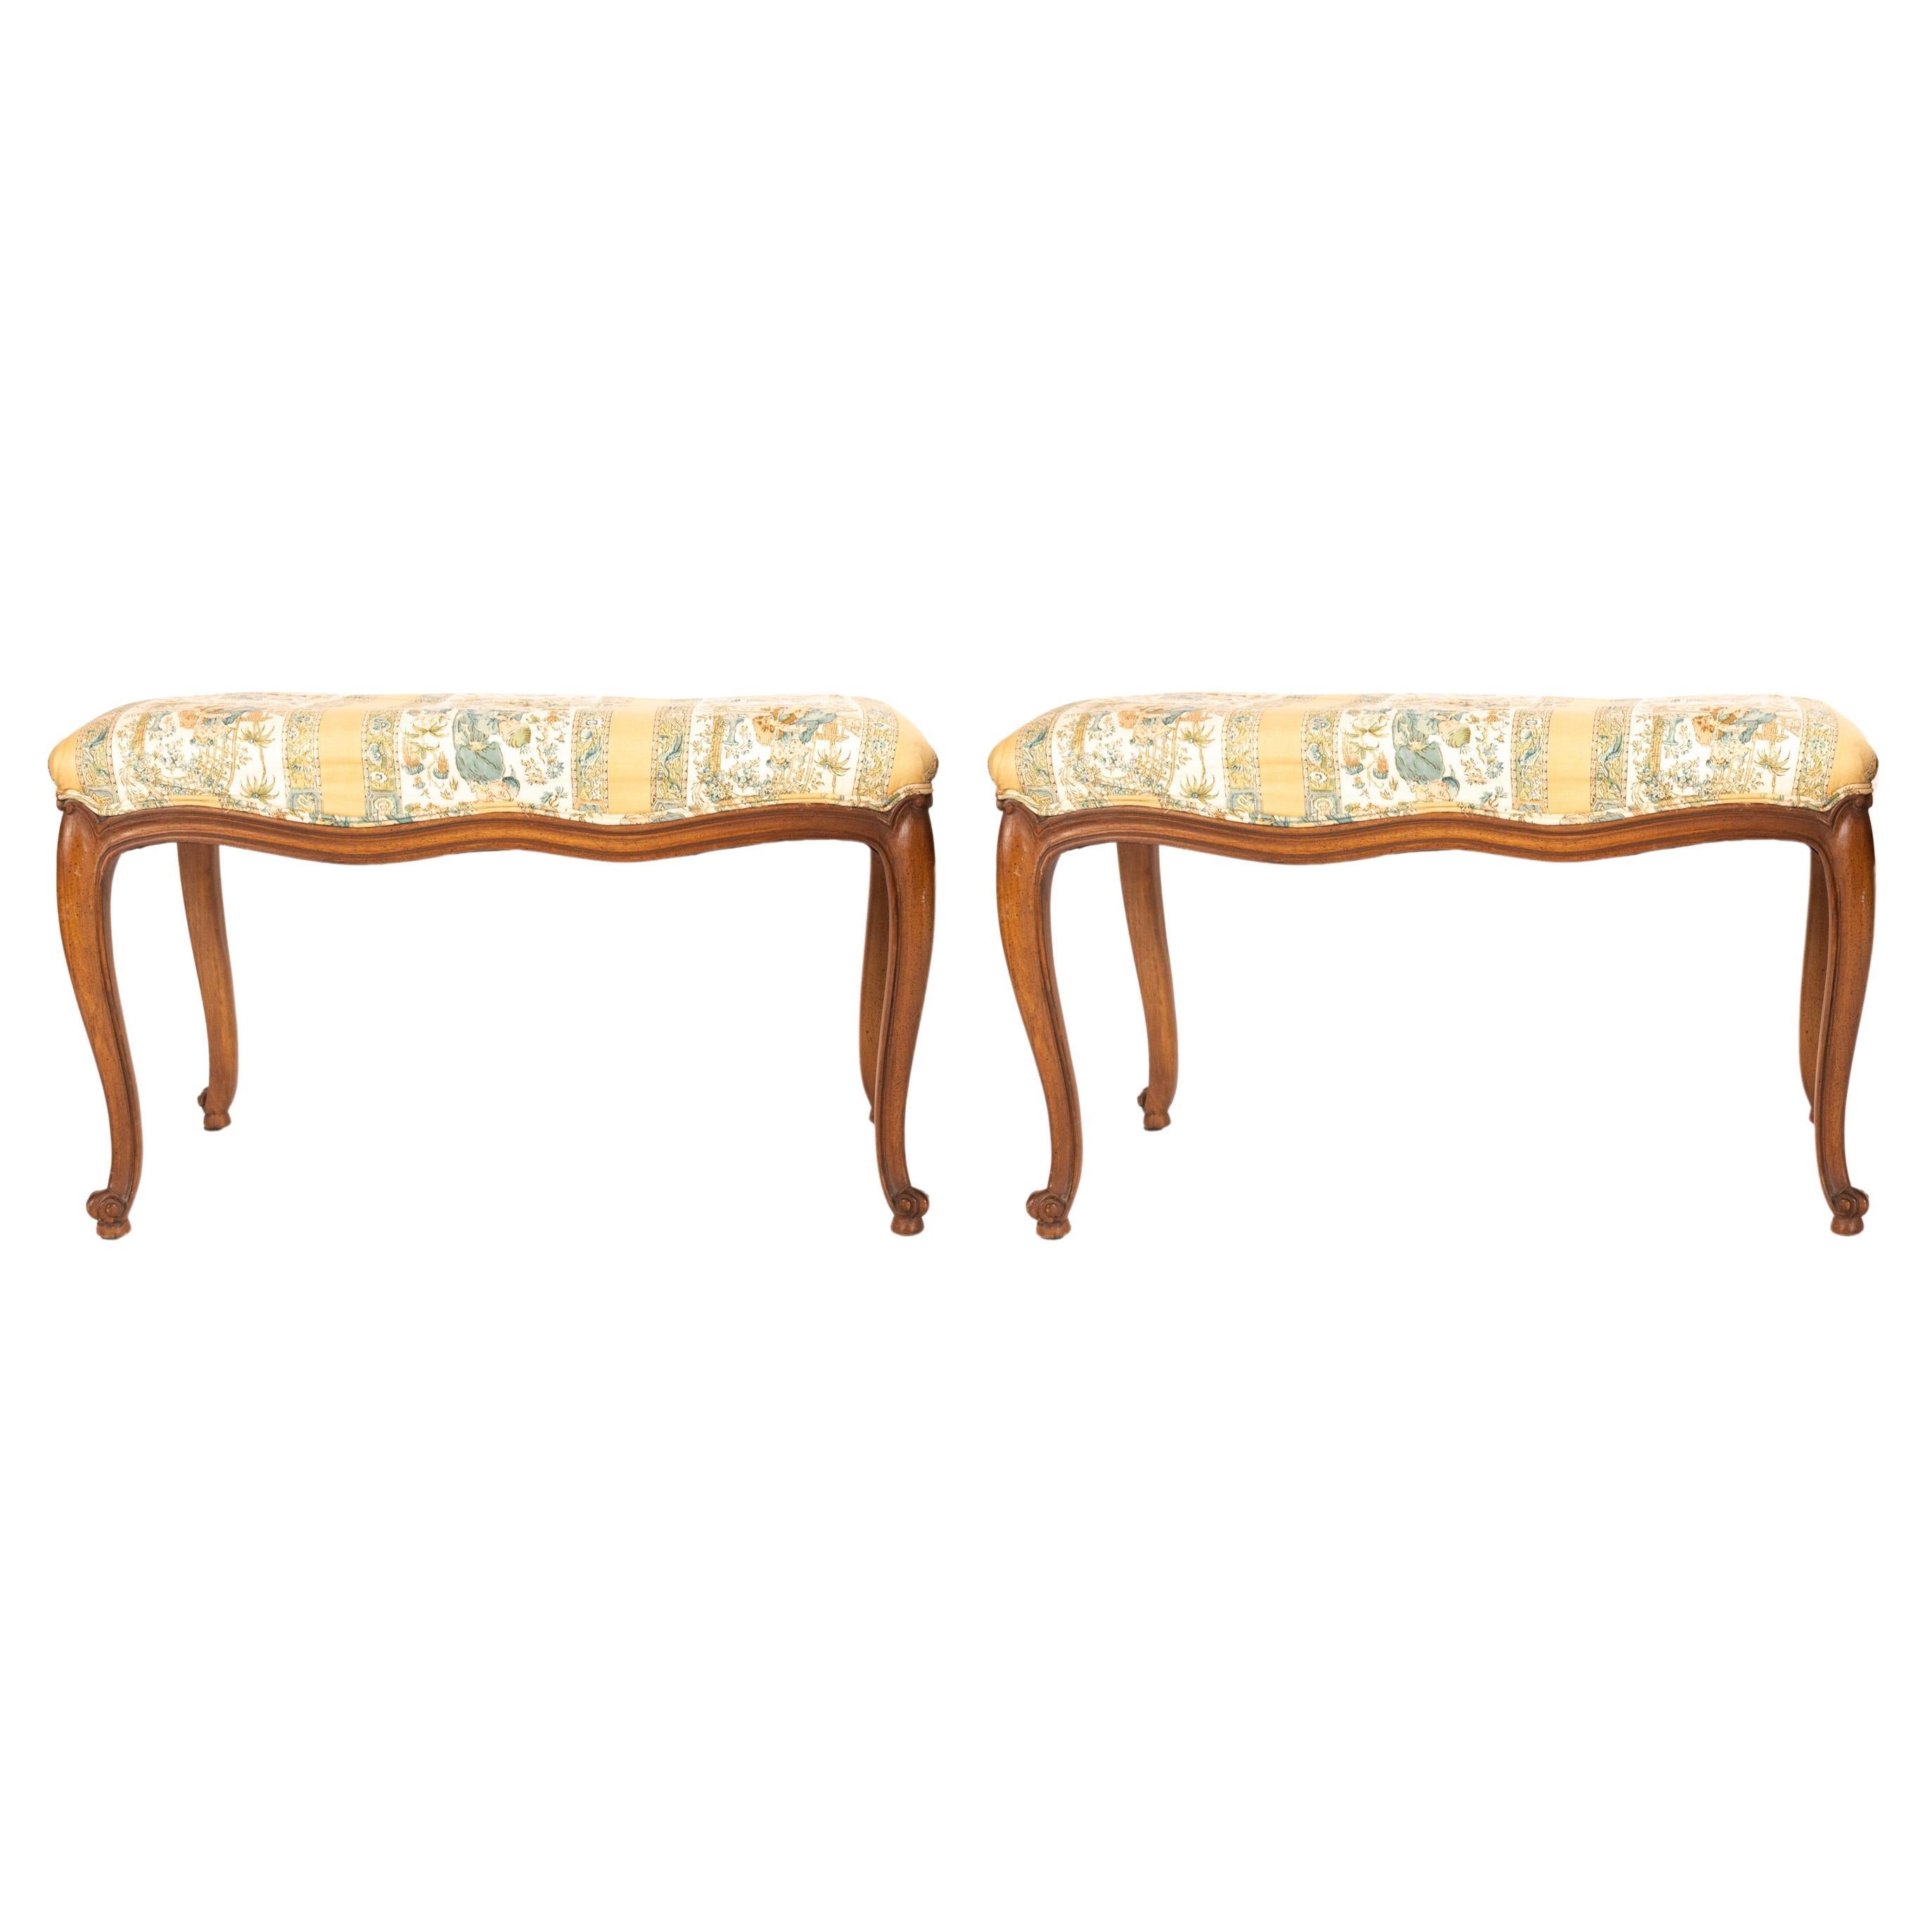 Pair of 19th Century Louis XVth-Style Fruitwood Benches with Upholstered Seats